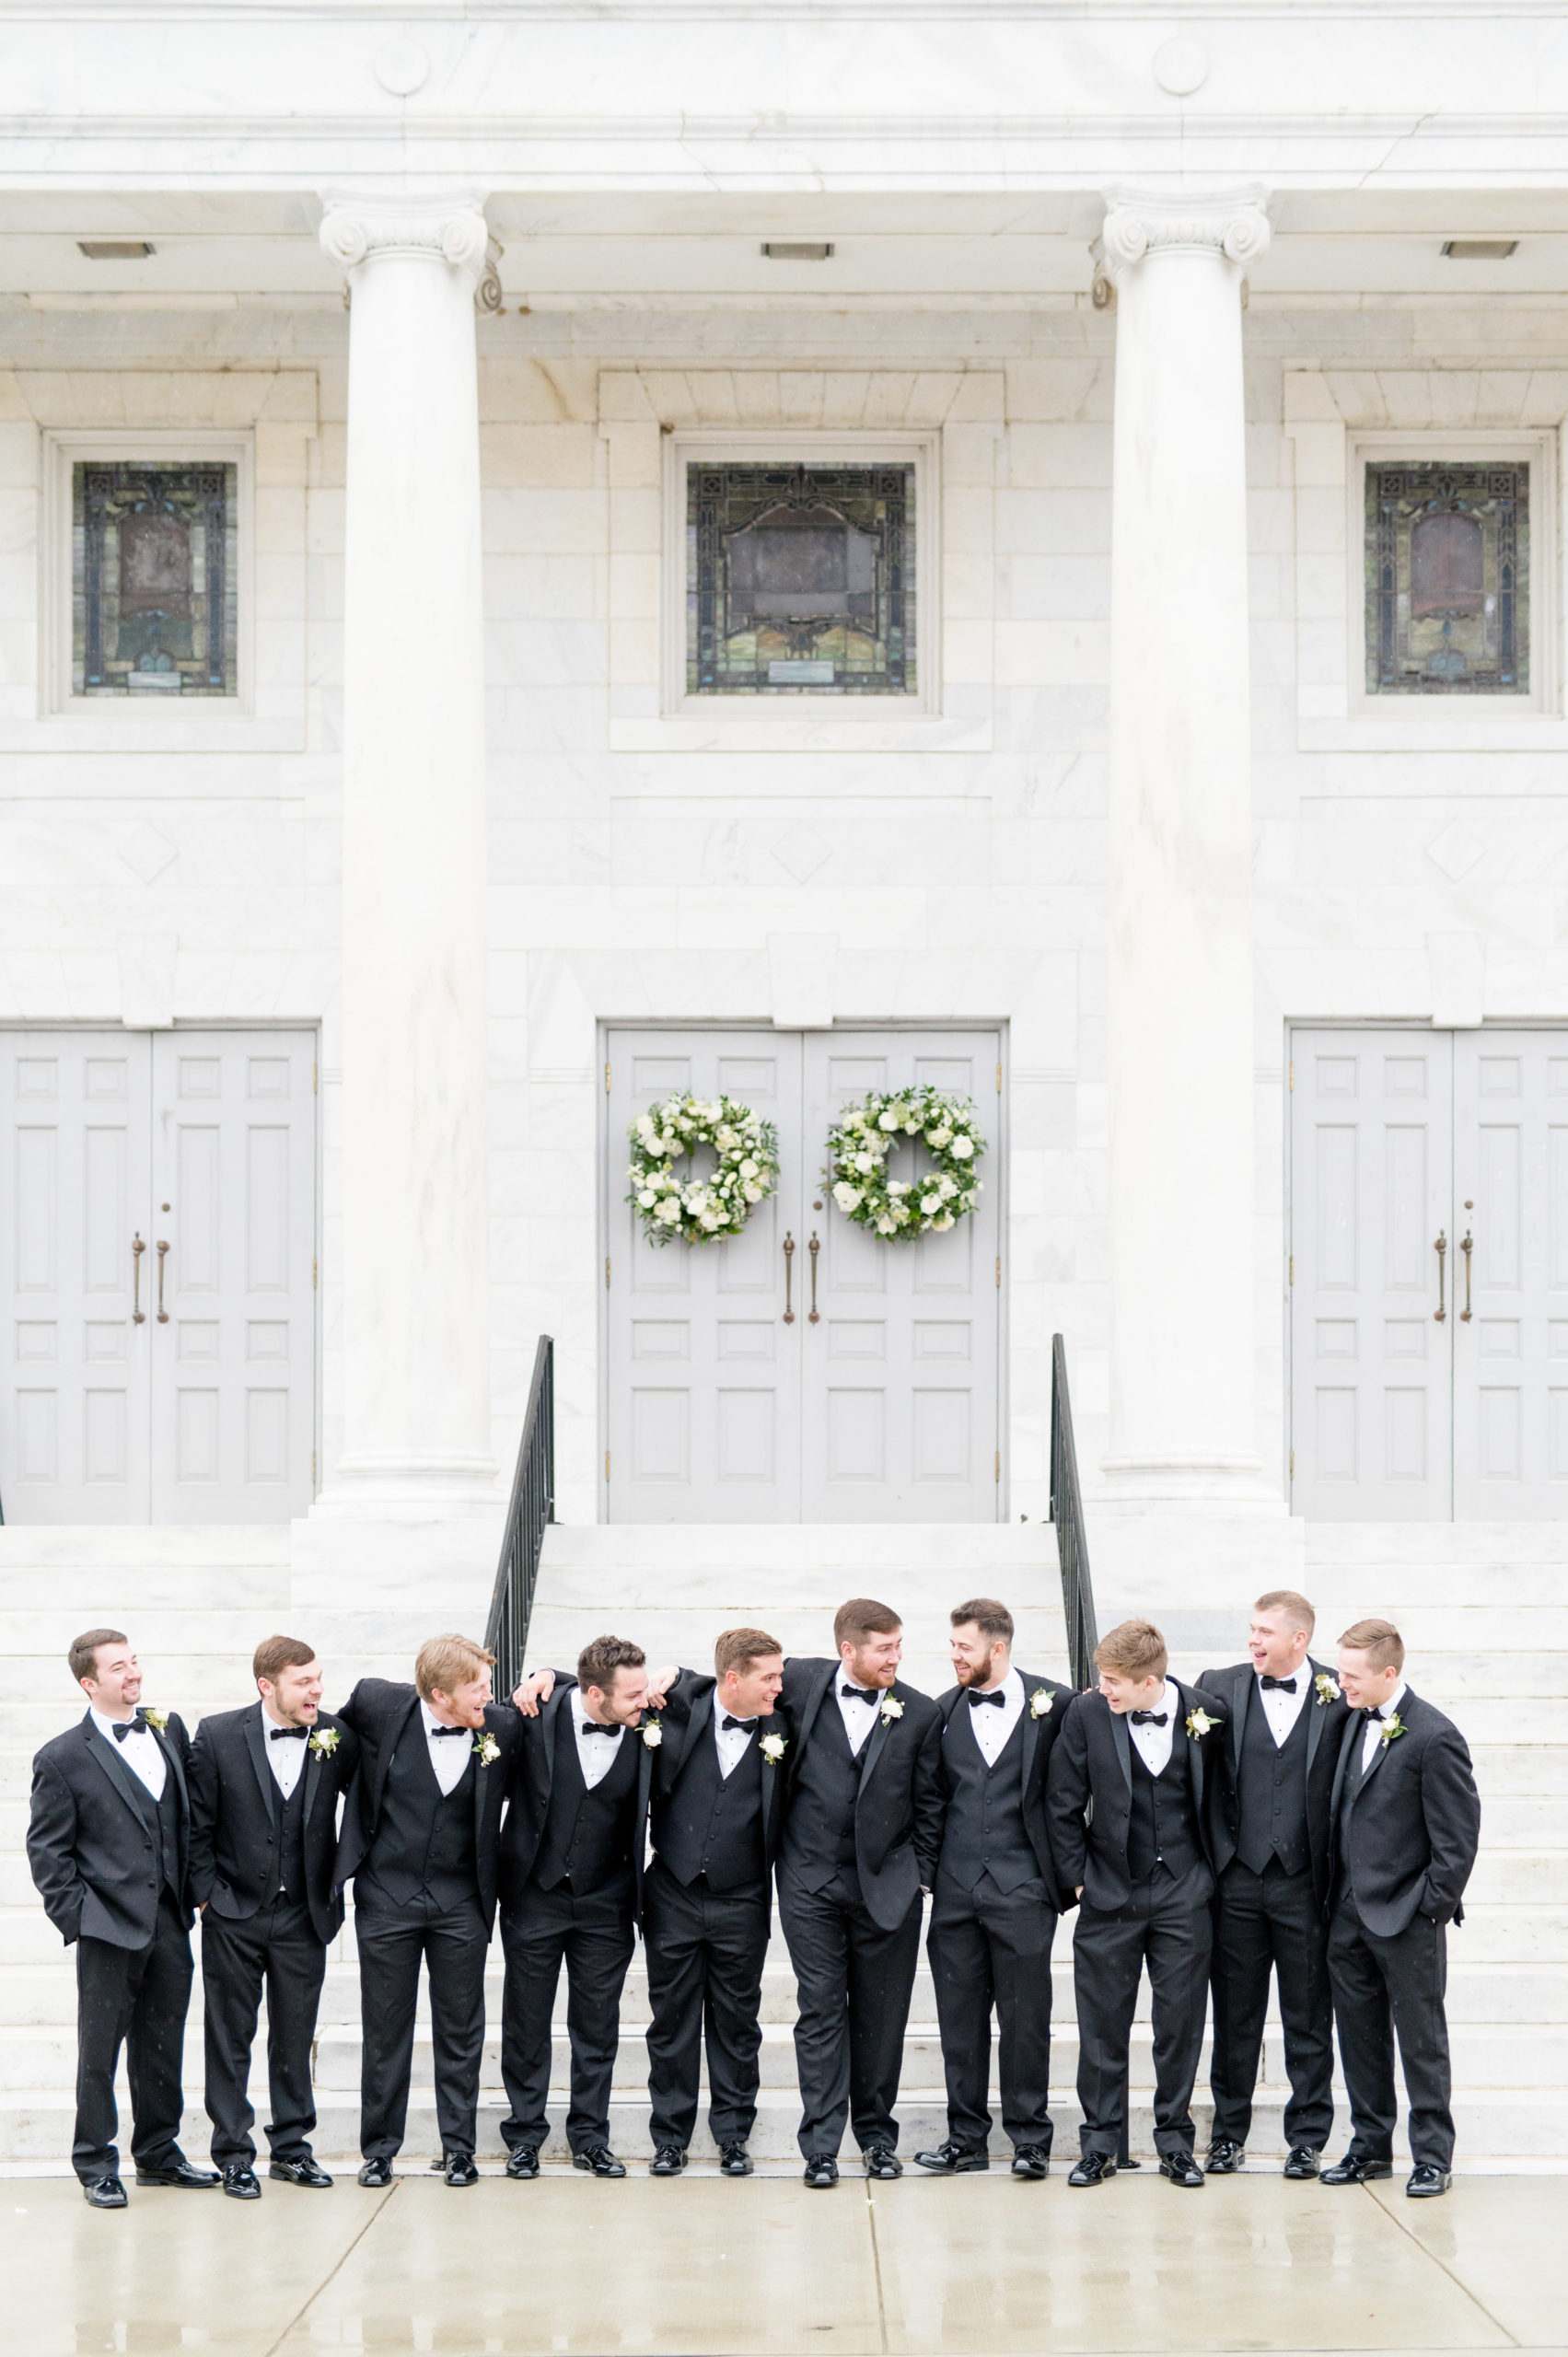 Groom and groomsmen laugh together at white church.